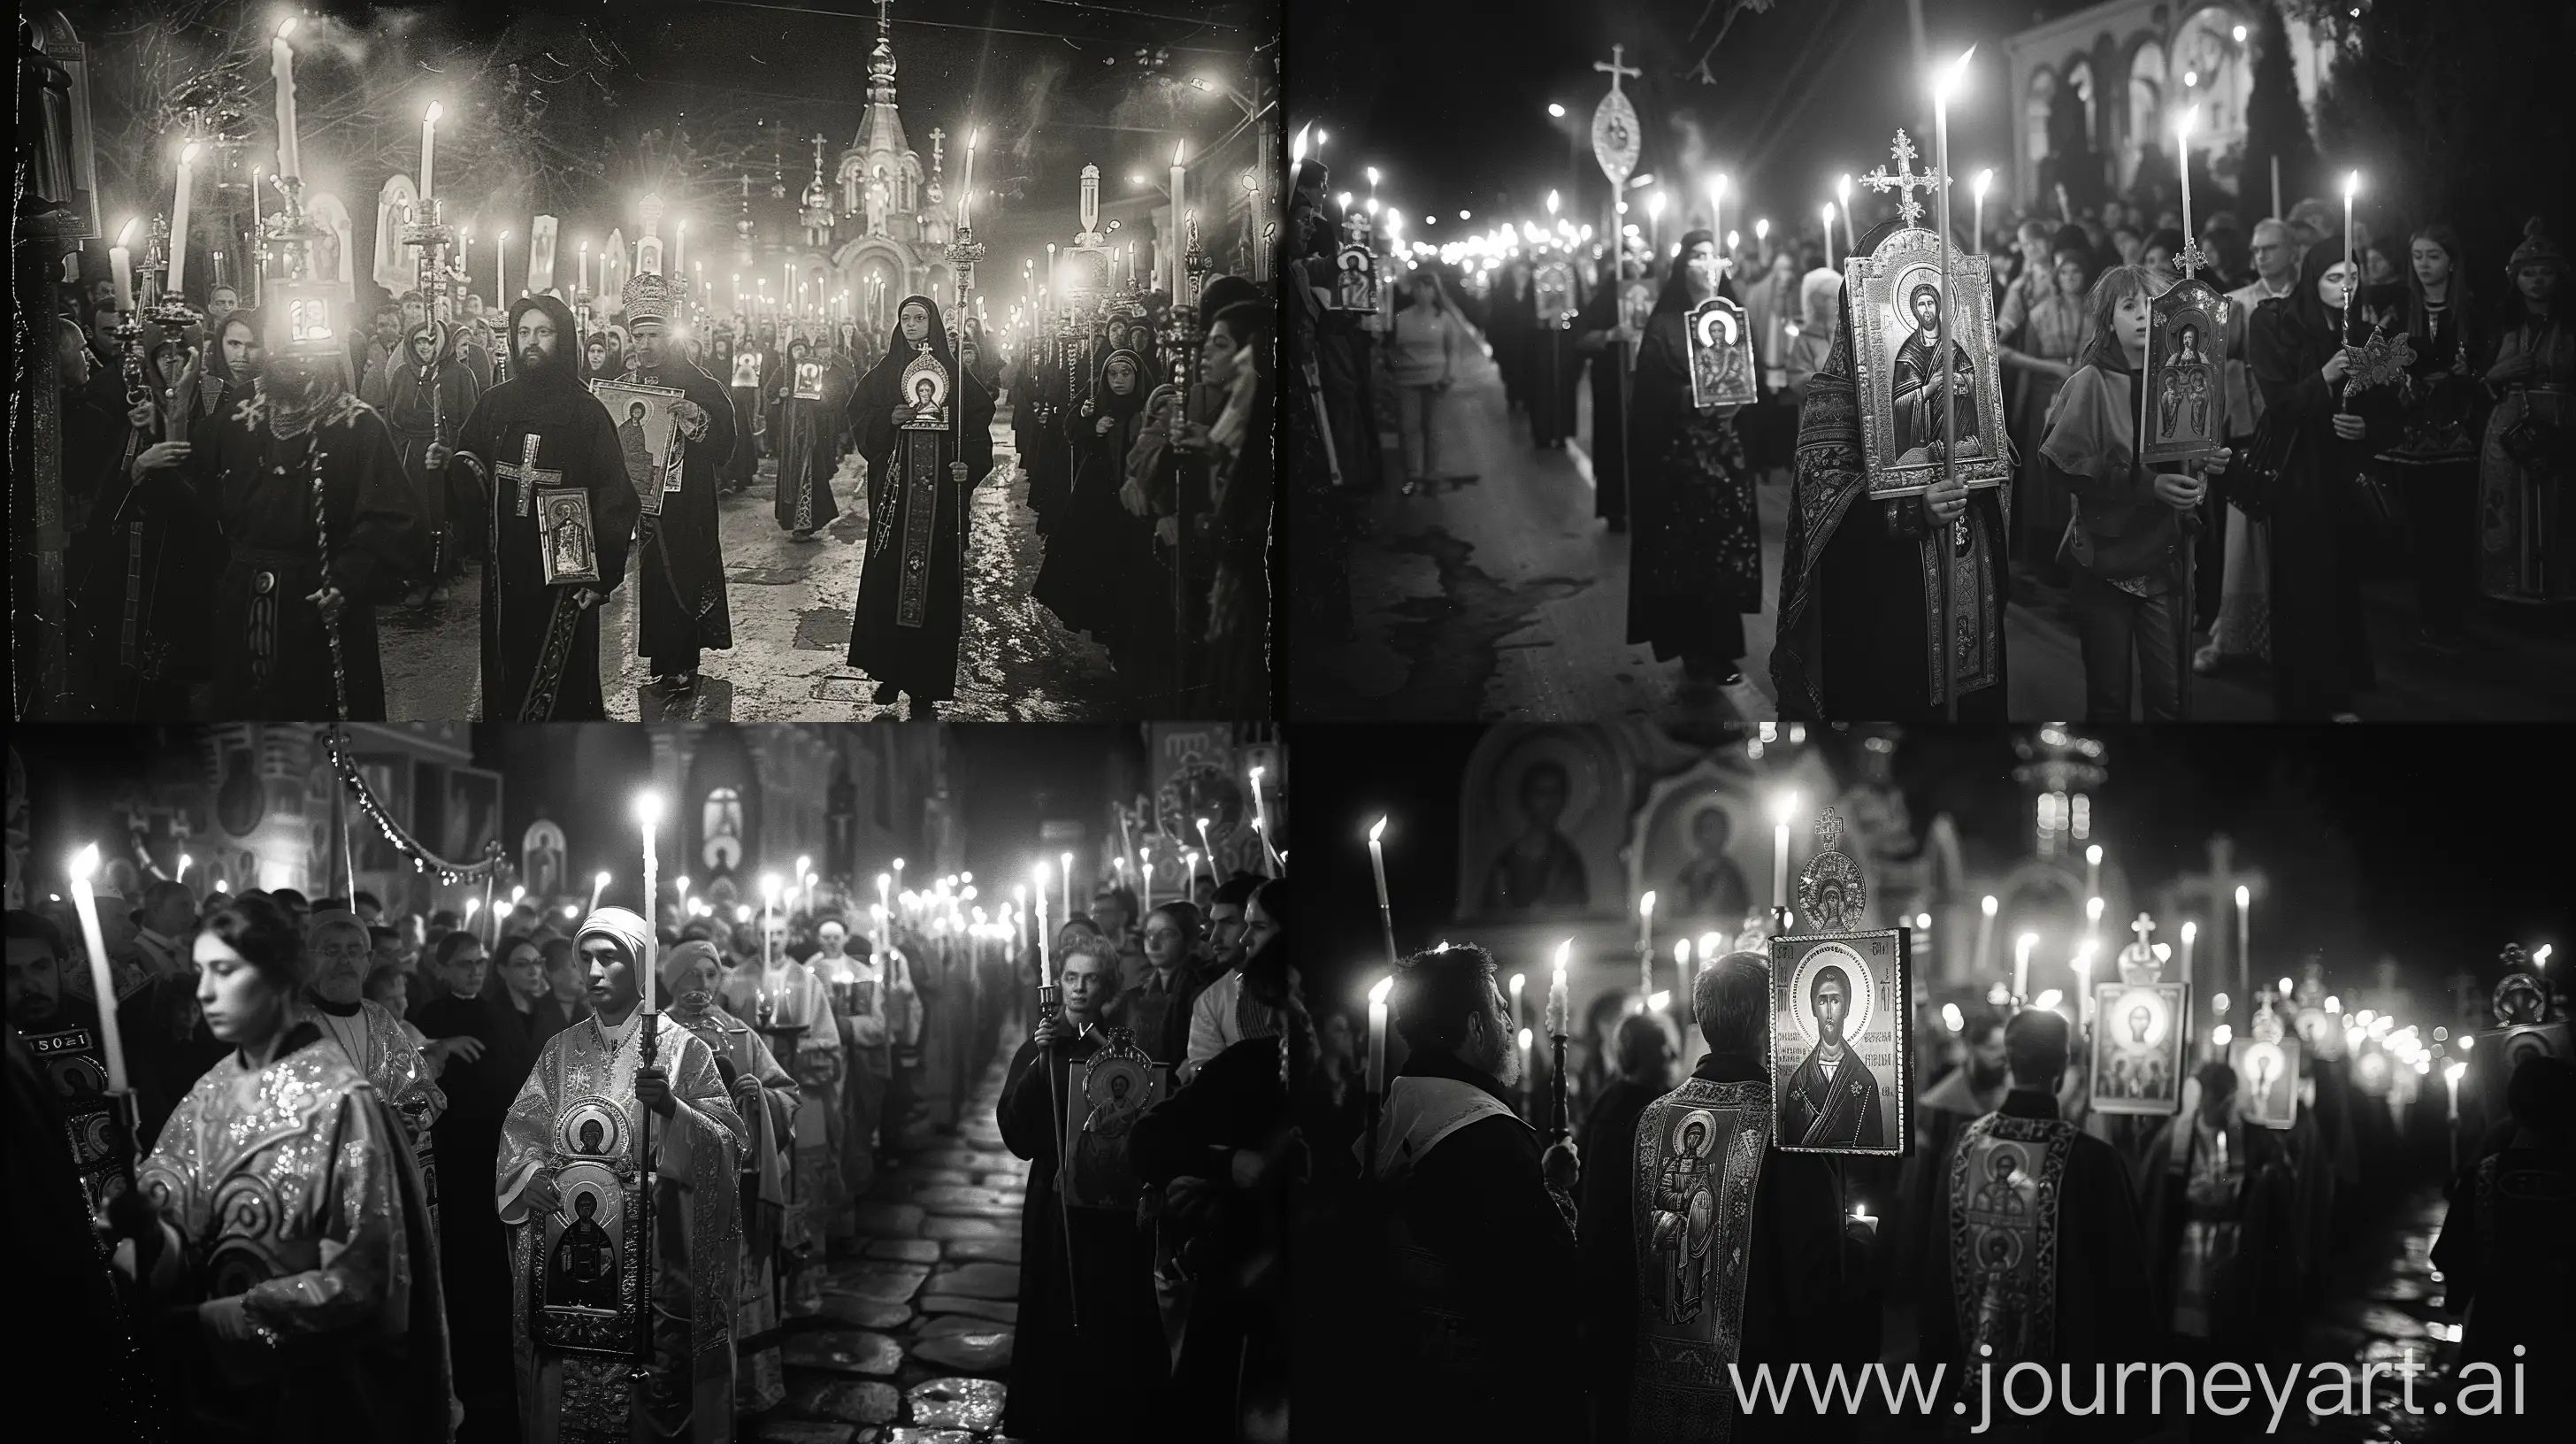 Orthodox-Easter-Procession-with-Candlelit-Icons-in-Vintage-Black-and-White-Photograph